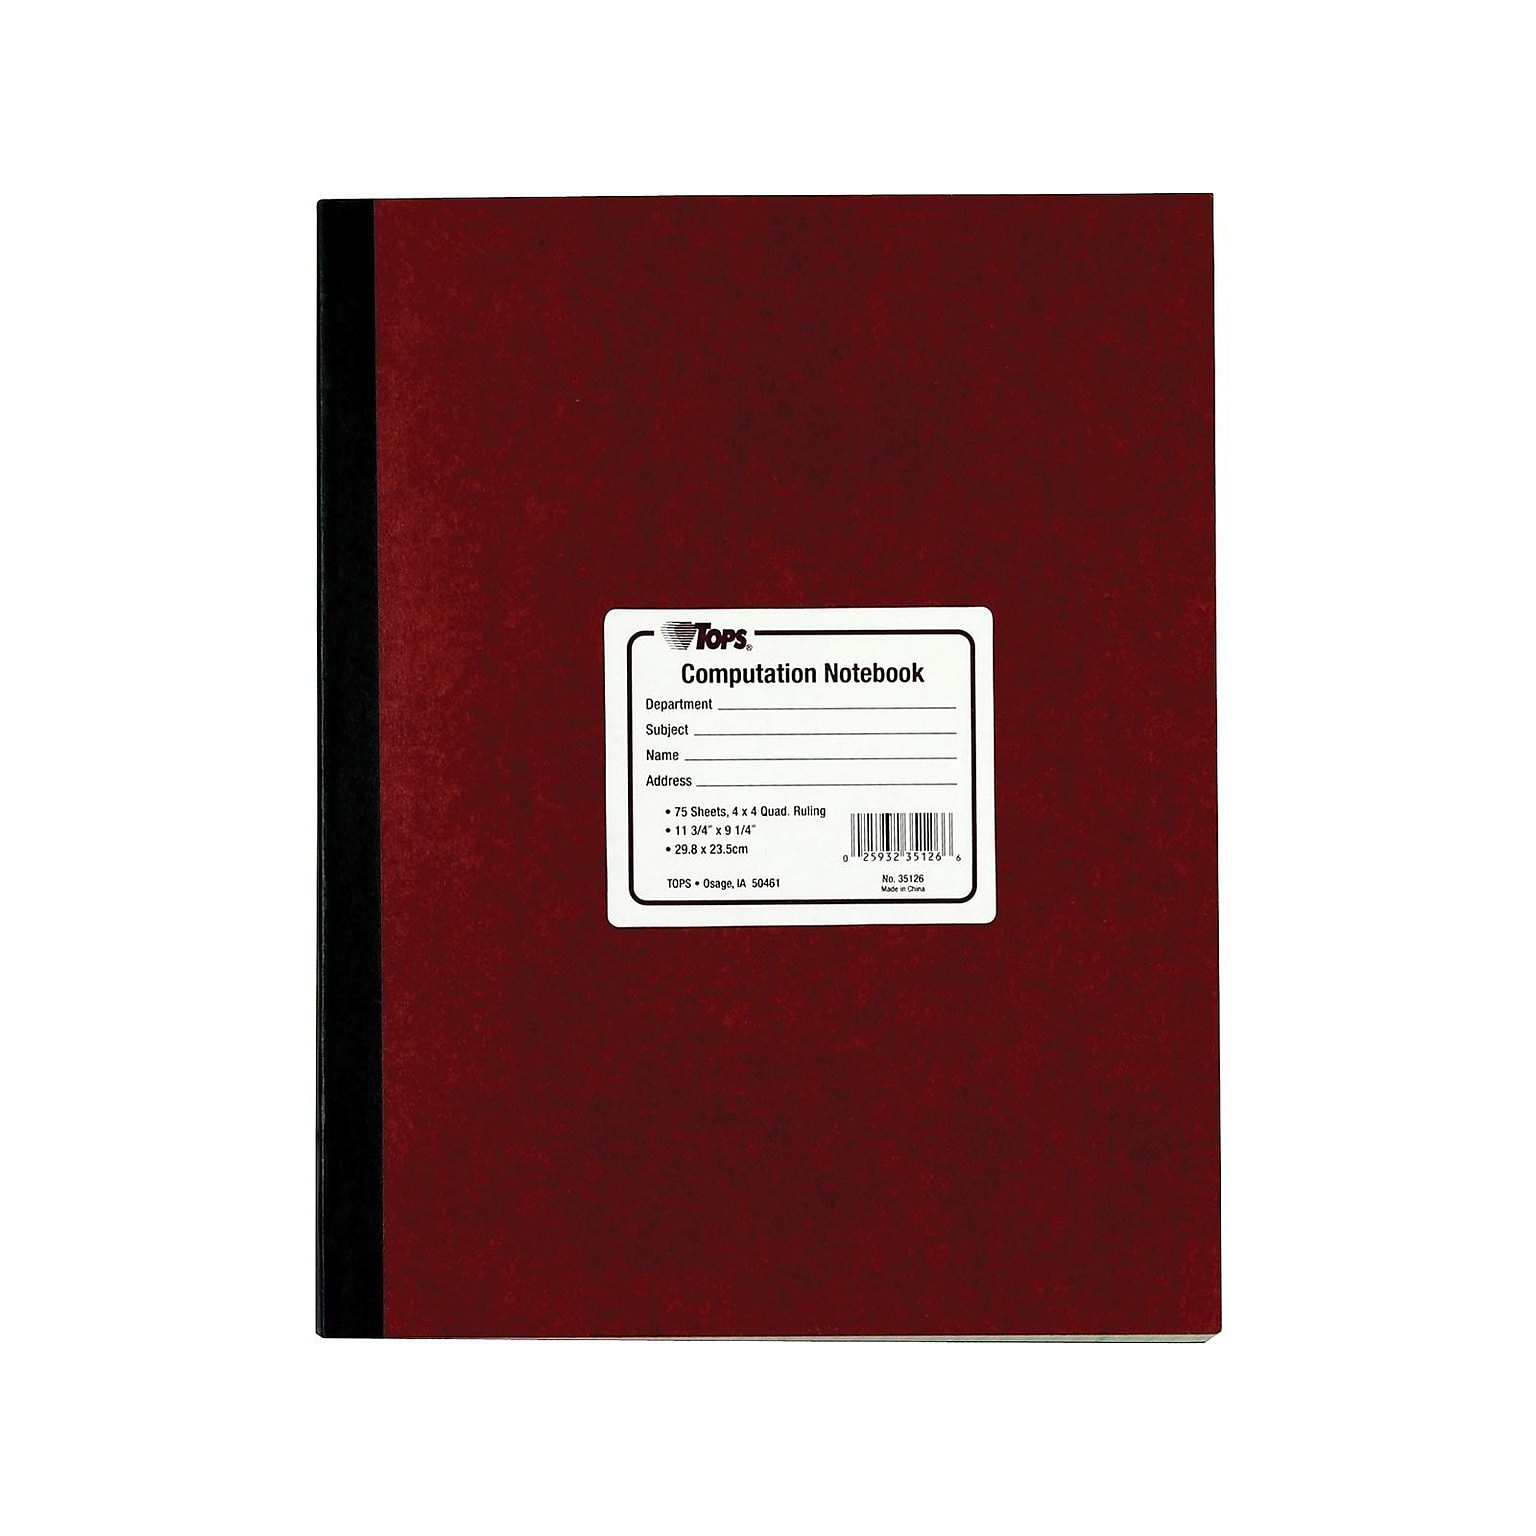 TOPS Computation Notebook, 9.5 x 11.75, Quad Ruled, 75 Sheets, Red (TOP 35126)